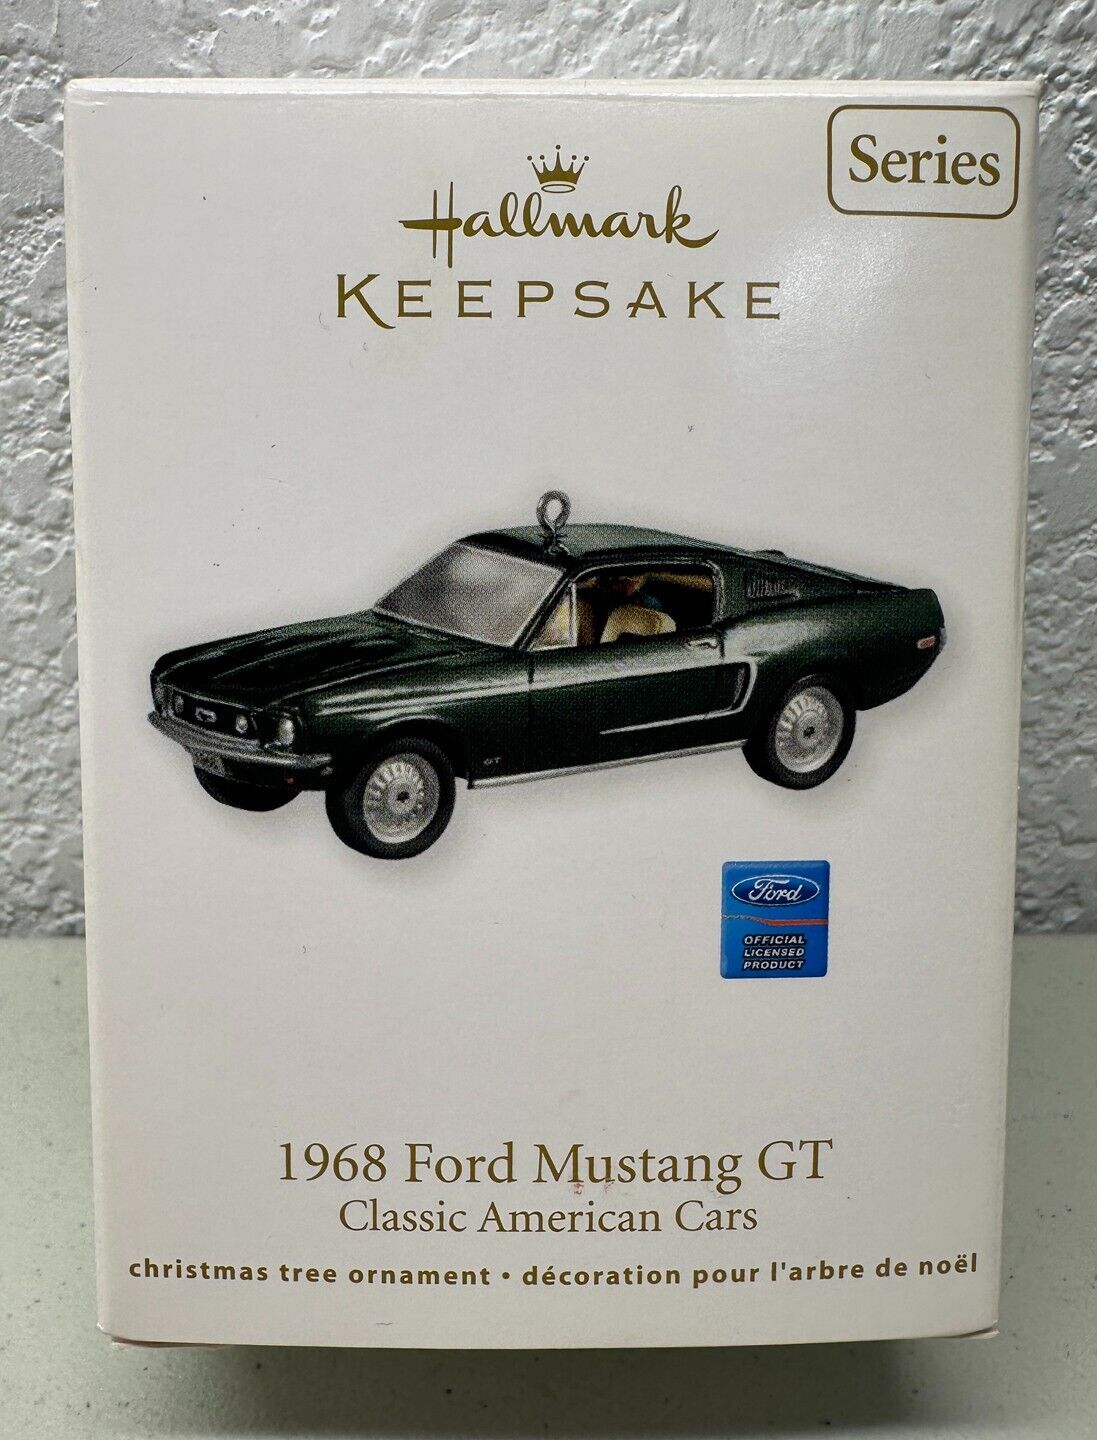 2011 Hallmark 21st Classic American Cars 1968 Ford Mustang GT Ornament Used